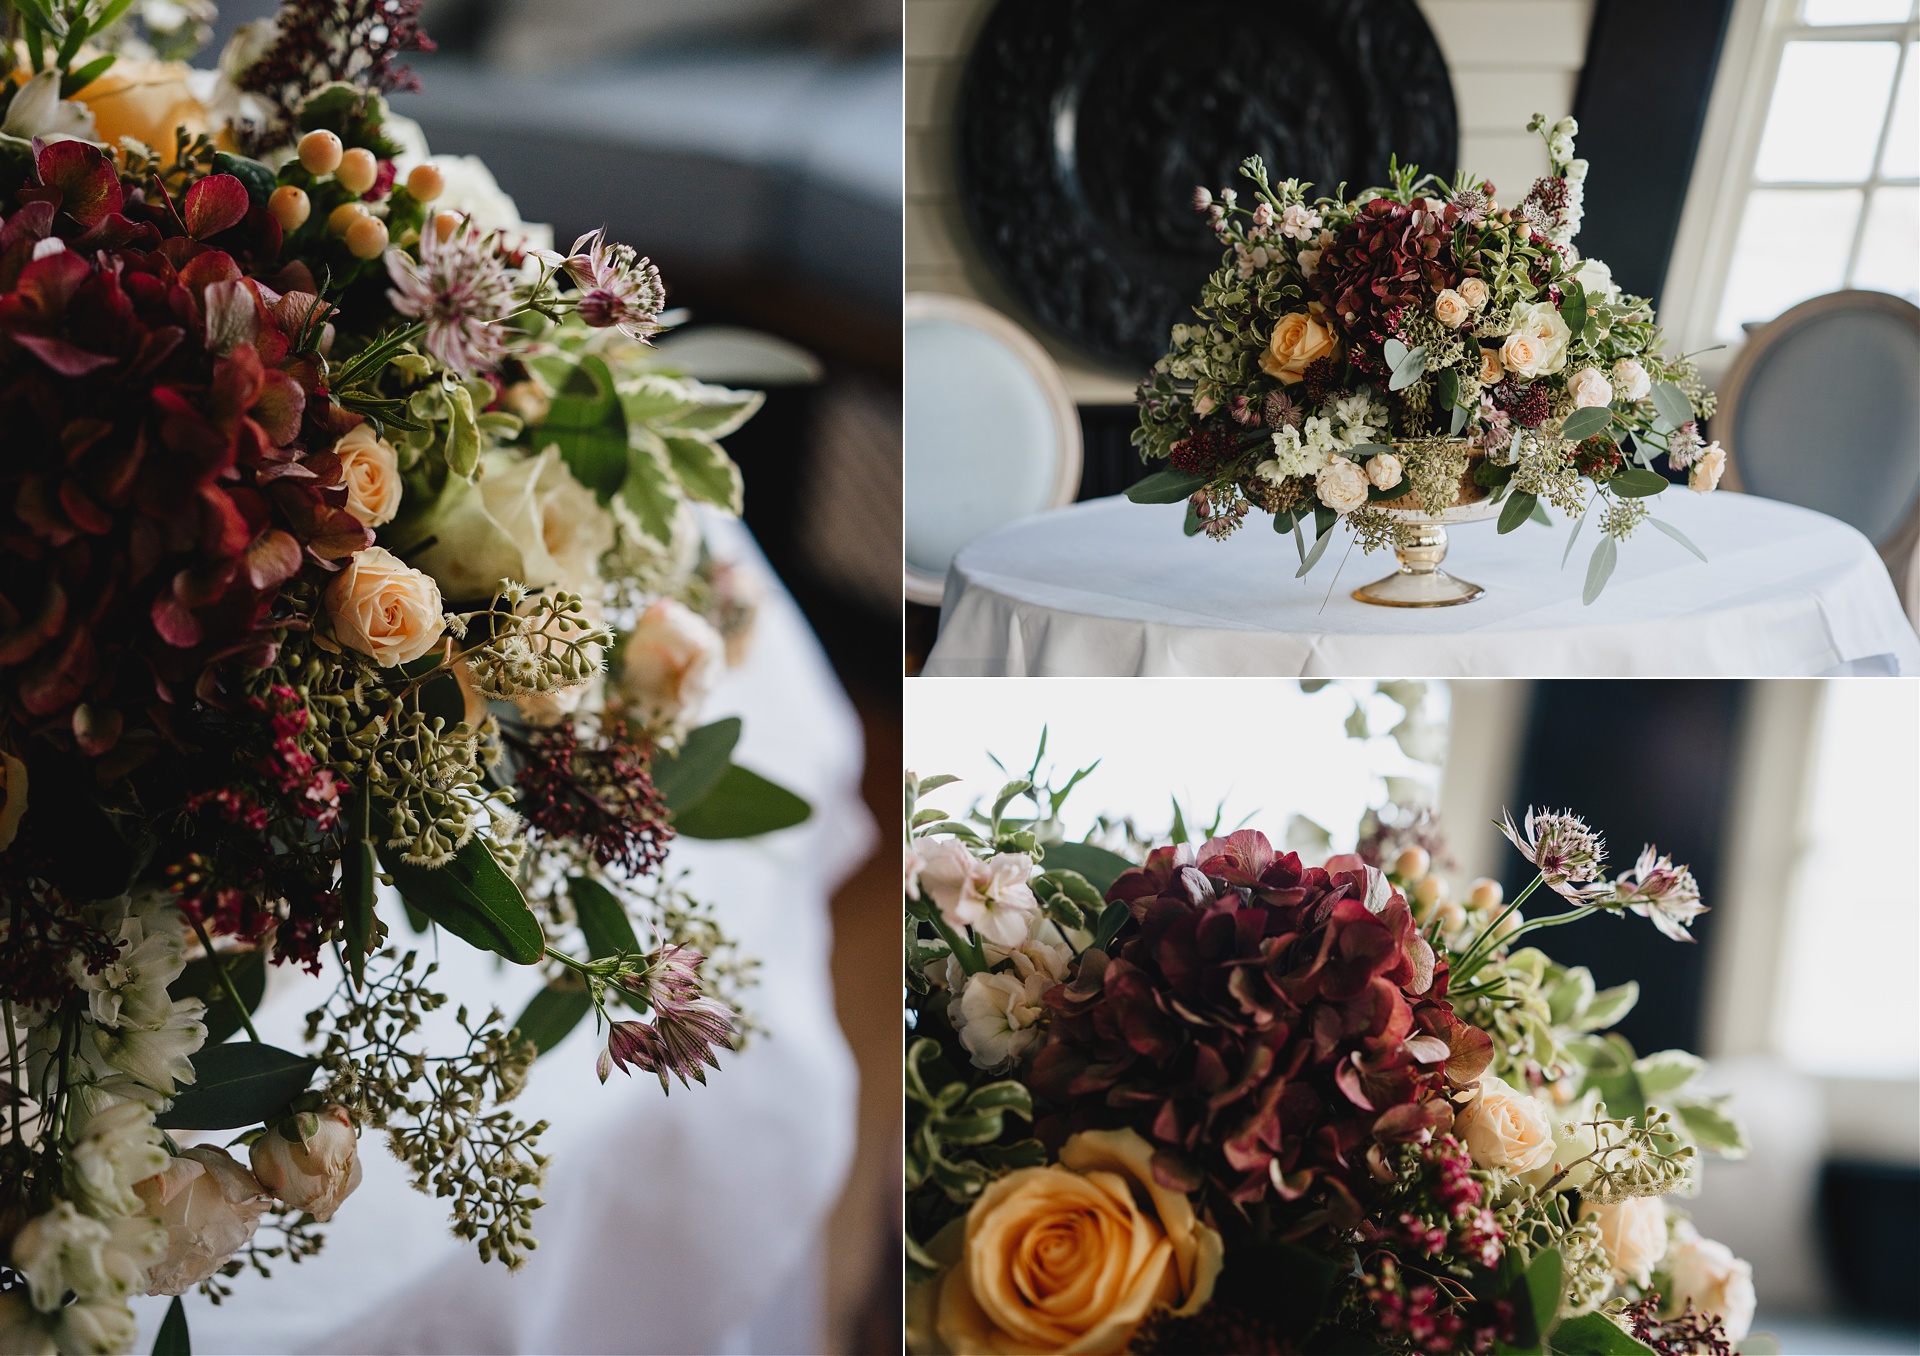 An arrangement of autumn wedding flowers, with beautiful delicate colours